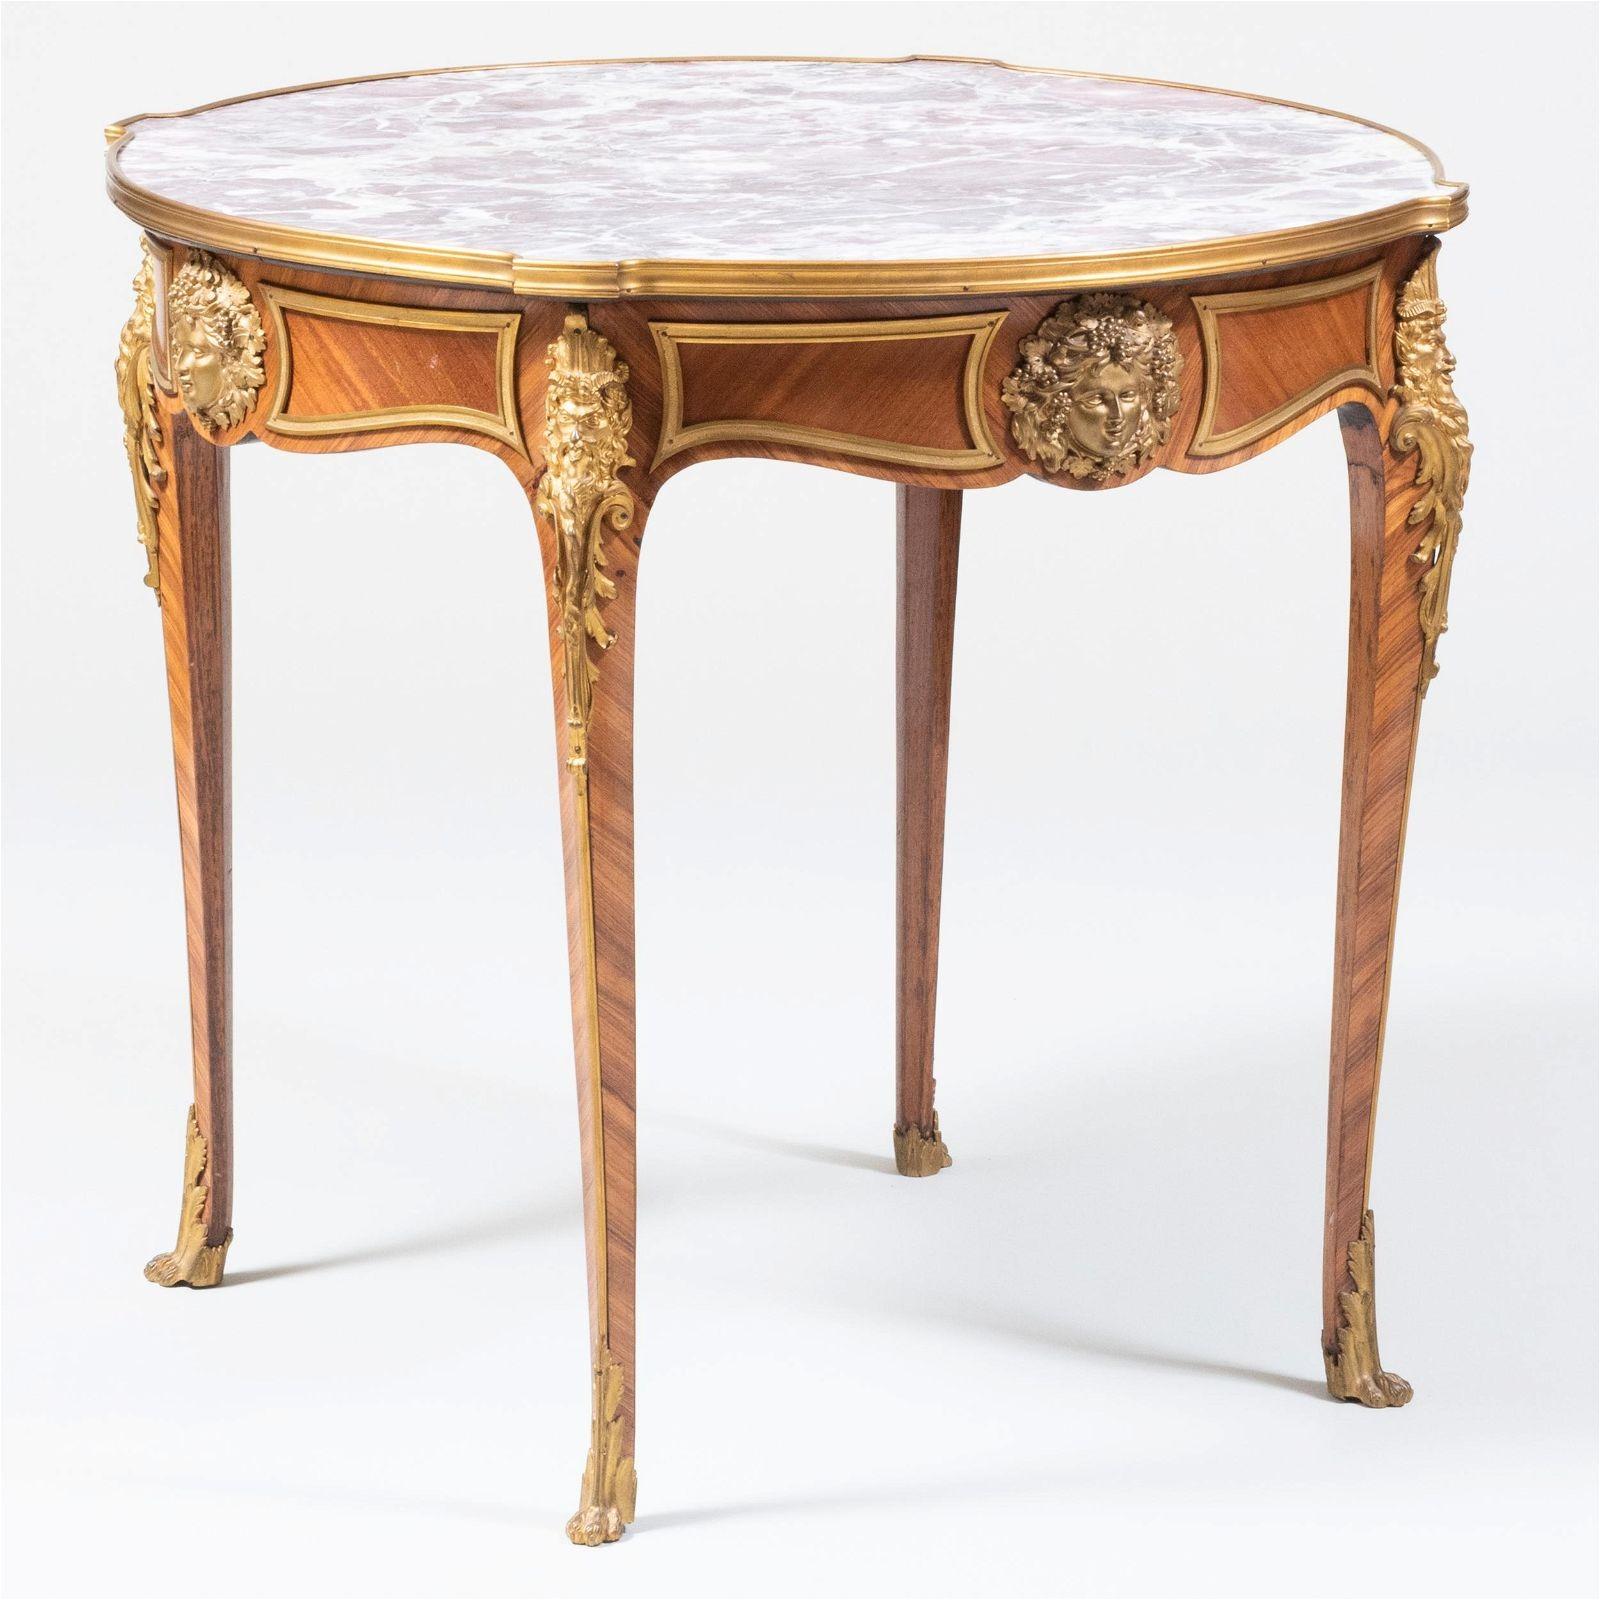 Exceptional 19th century center table in the Louis XV style with parquetry veneer in mahogany and kingwood, gilt bronze mounts including Bacchanal masks on four sides, and variegated marble top in light violet and white.
